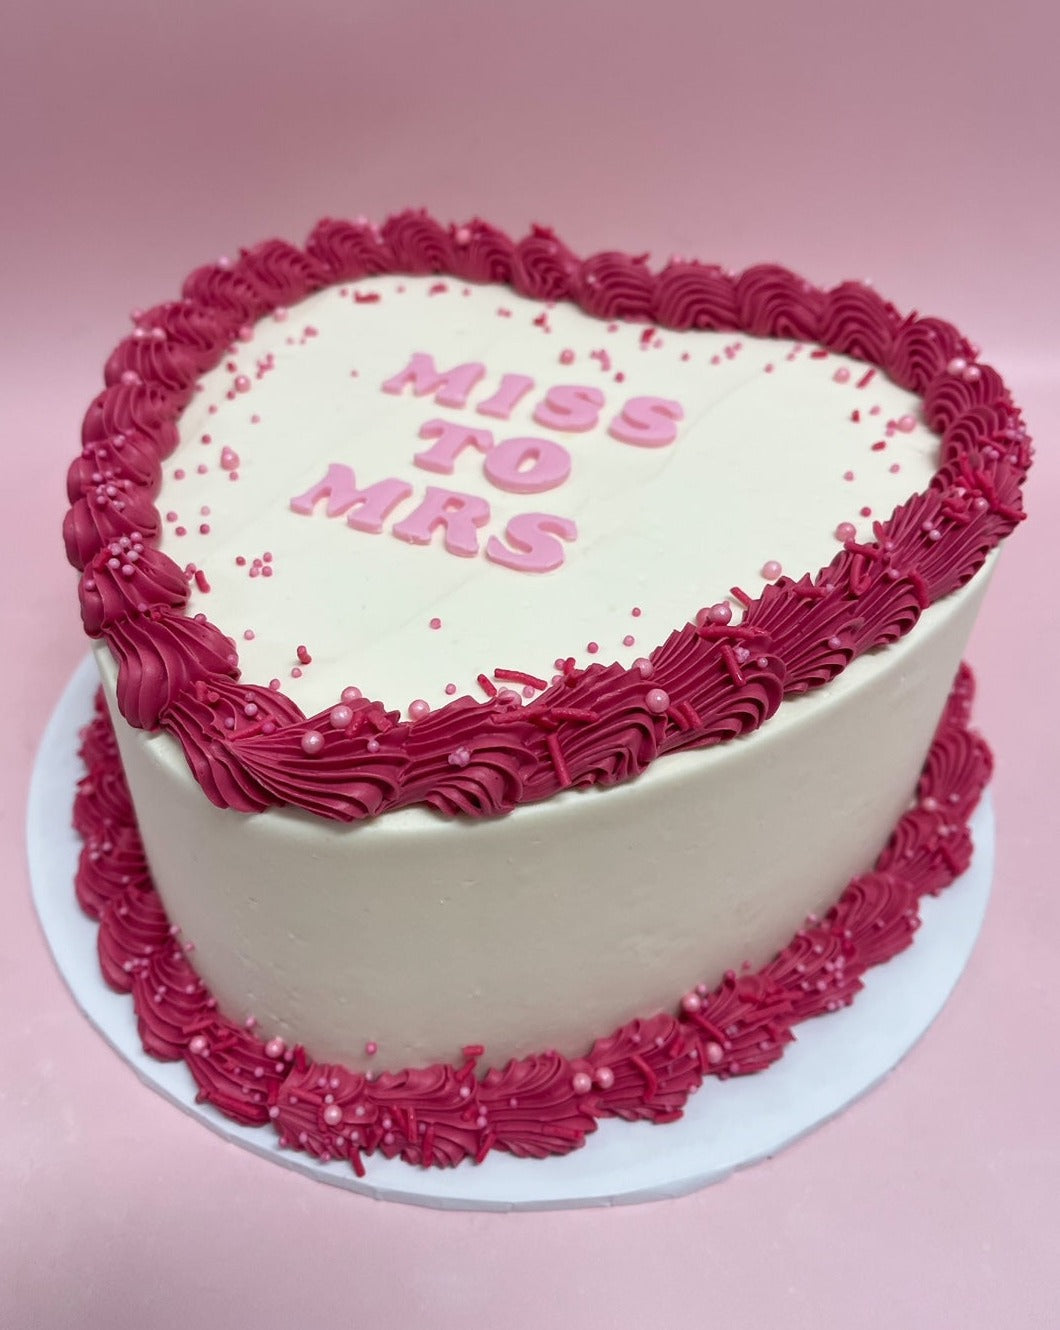 Small Red Velvet Cake with Mini Hearts! – Corrigan Sisters